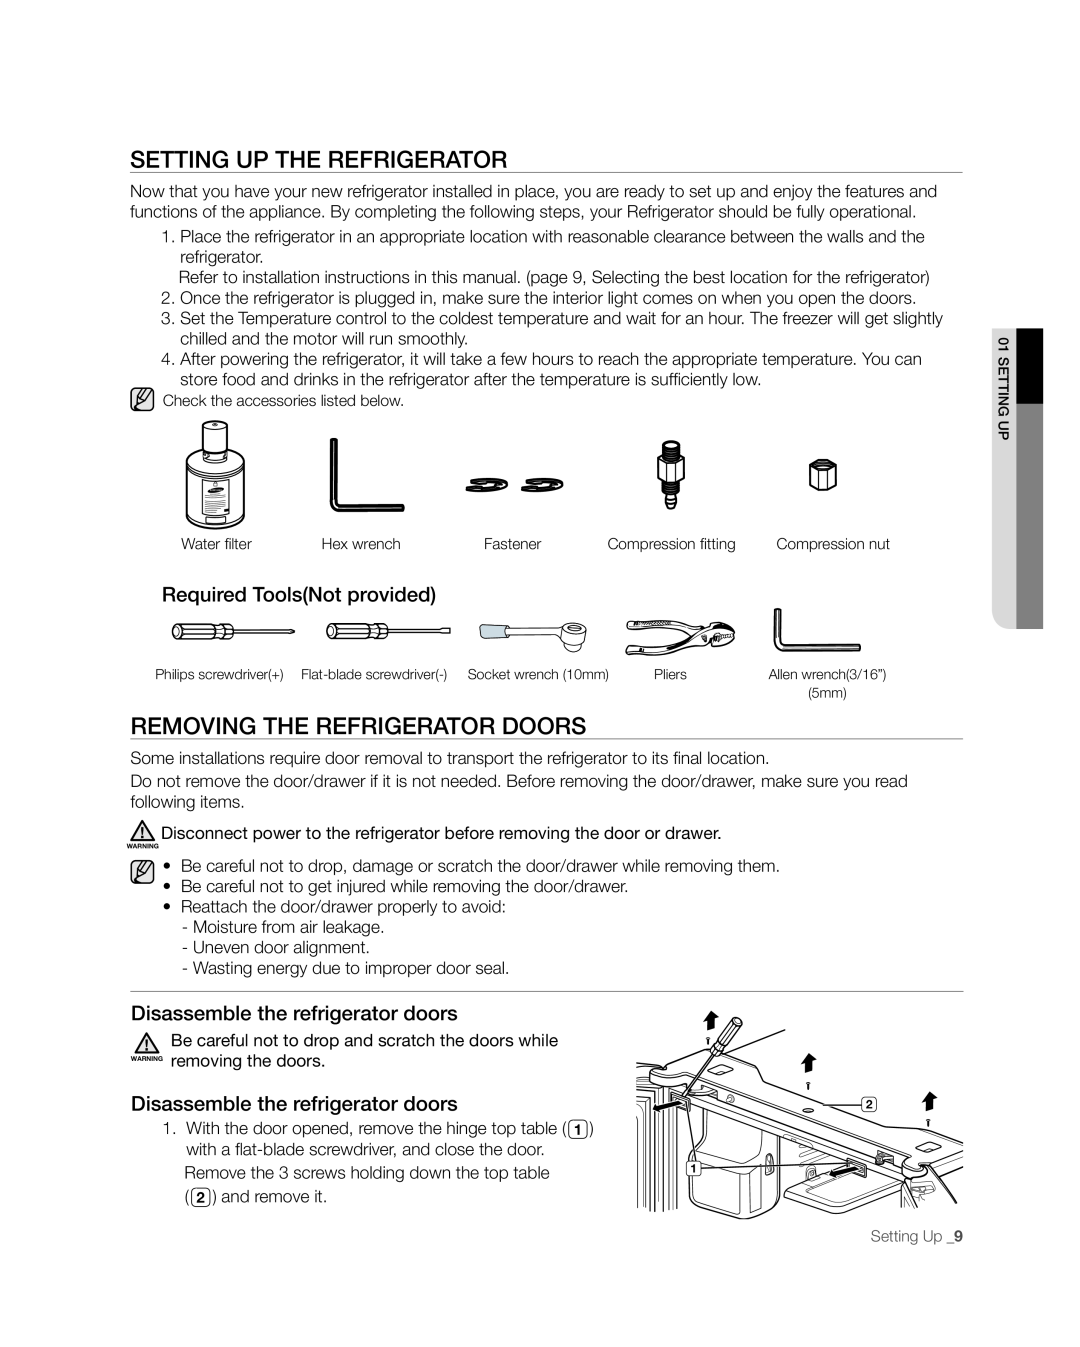 Samsung RFG238AARS, RFG237 setting uP tHe ReFRigeRAtoR, Removing the refrigerator doors, Required ToolsNot provided 